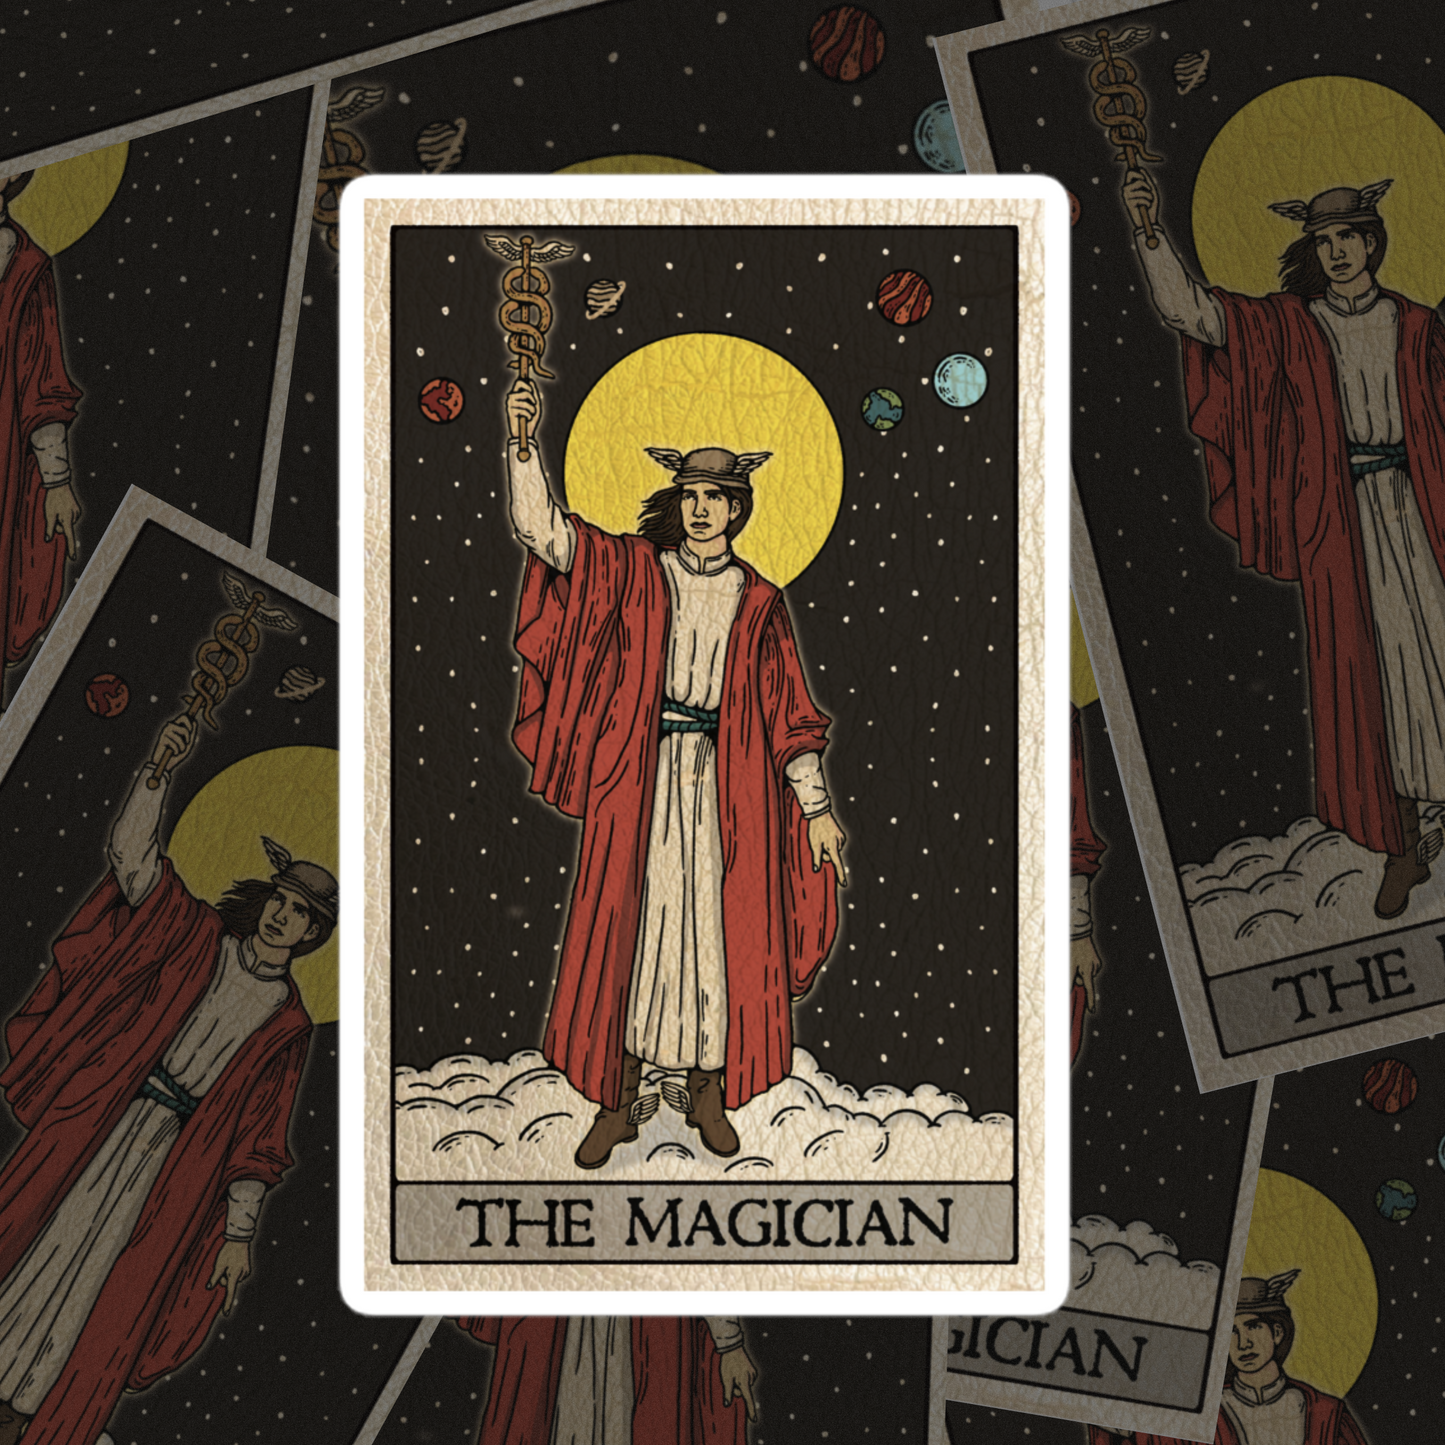 Tarot Card ‘The Magician’ Bubble-free stickers | Laptop, Locker, Crafting